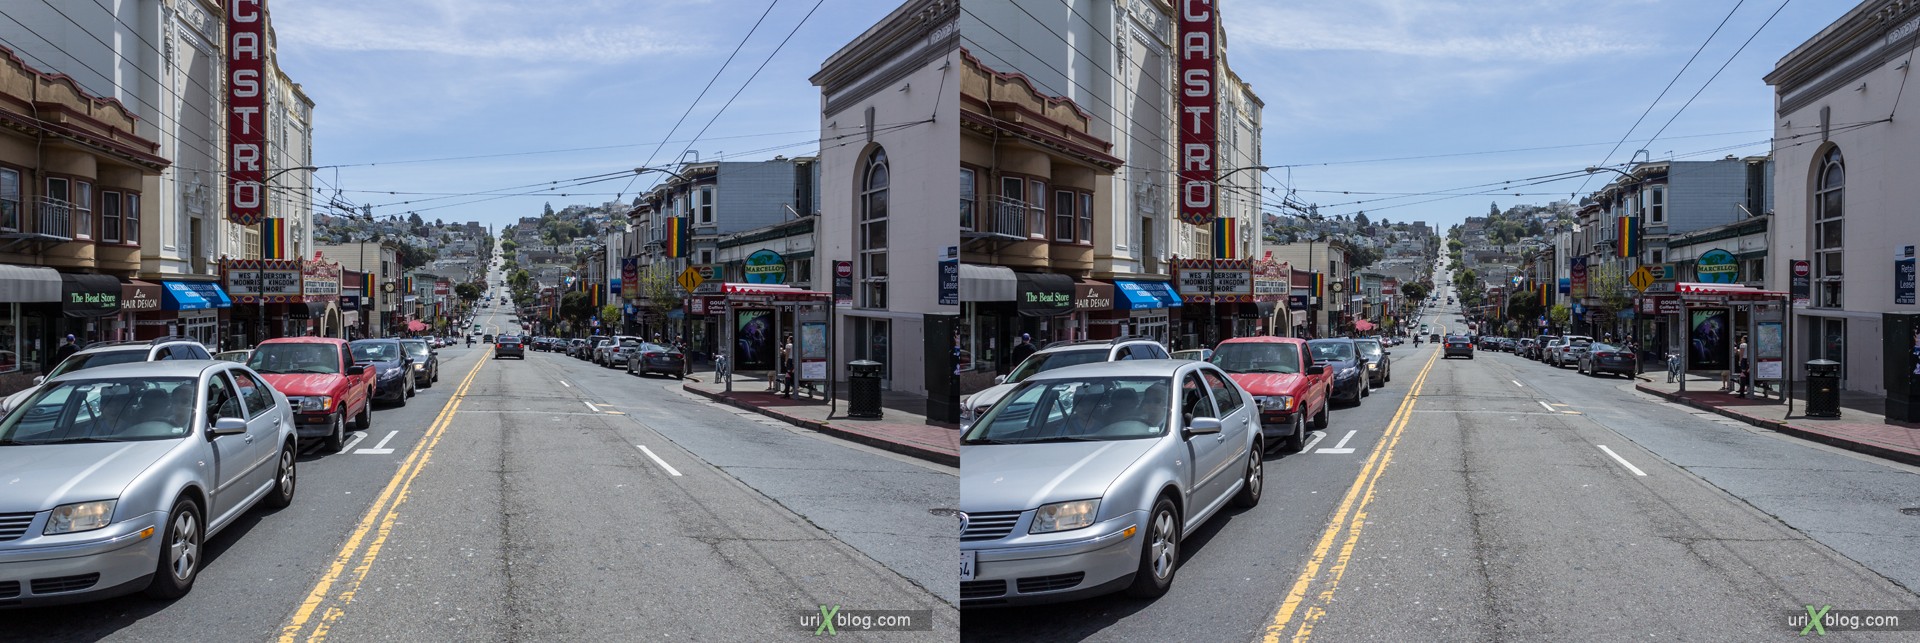 2013, Castro, Dolores Heights, San Francisco, USA, 3D, stereo pair, cross-eyed, crossview, cross view stereo pair, stereoscopic